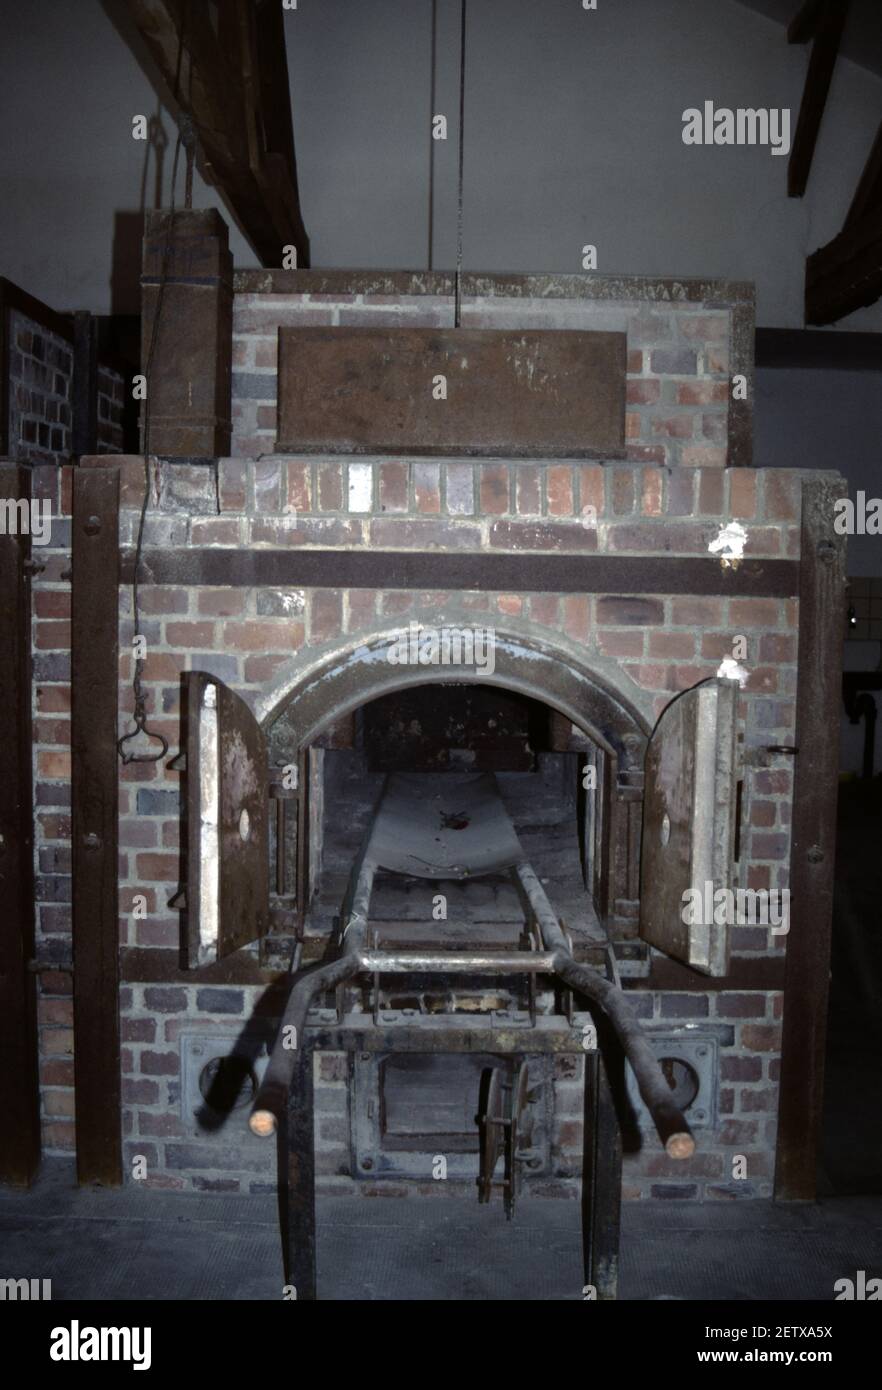 Dachau, Germany. 6/26/1990. Out of the five ovens at Dachau concentration camp, four were made by H. Kori and one by Topf & Söhne. Stock Photo